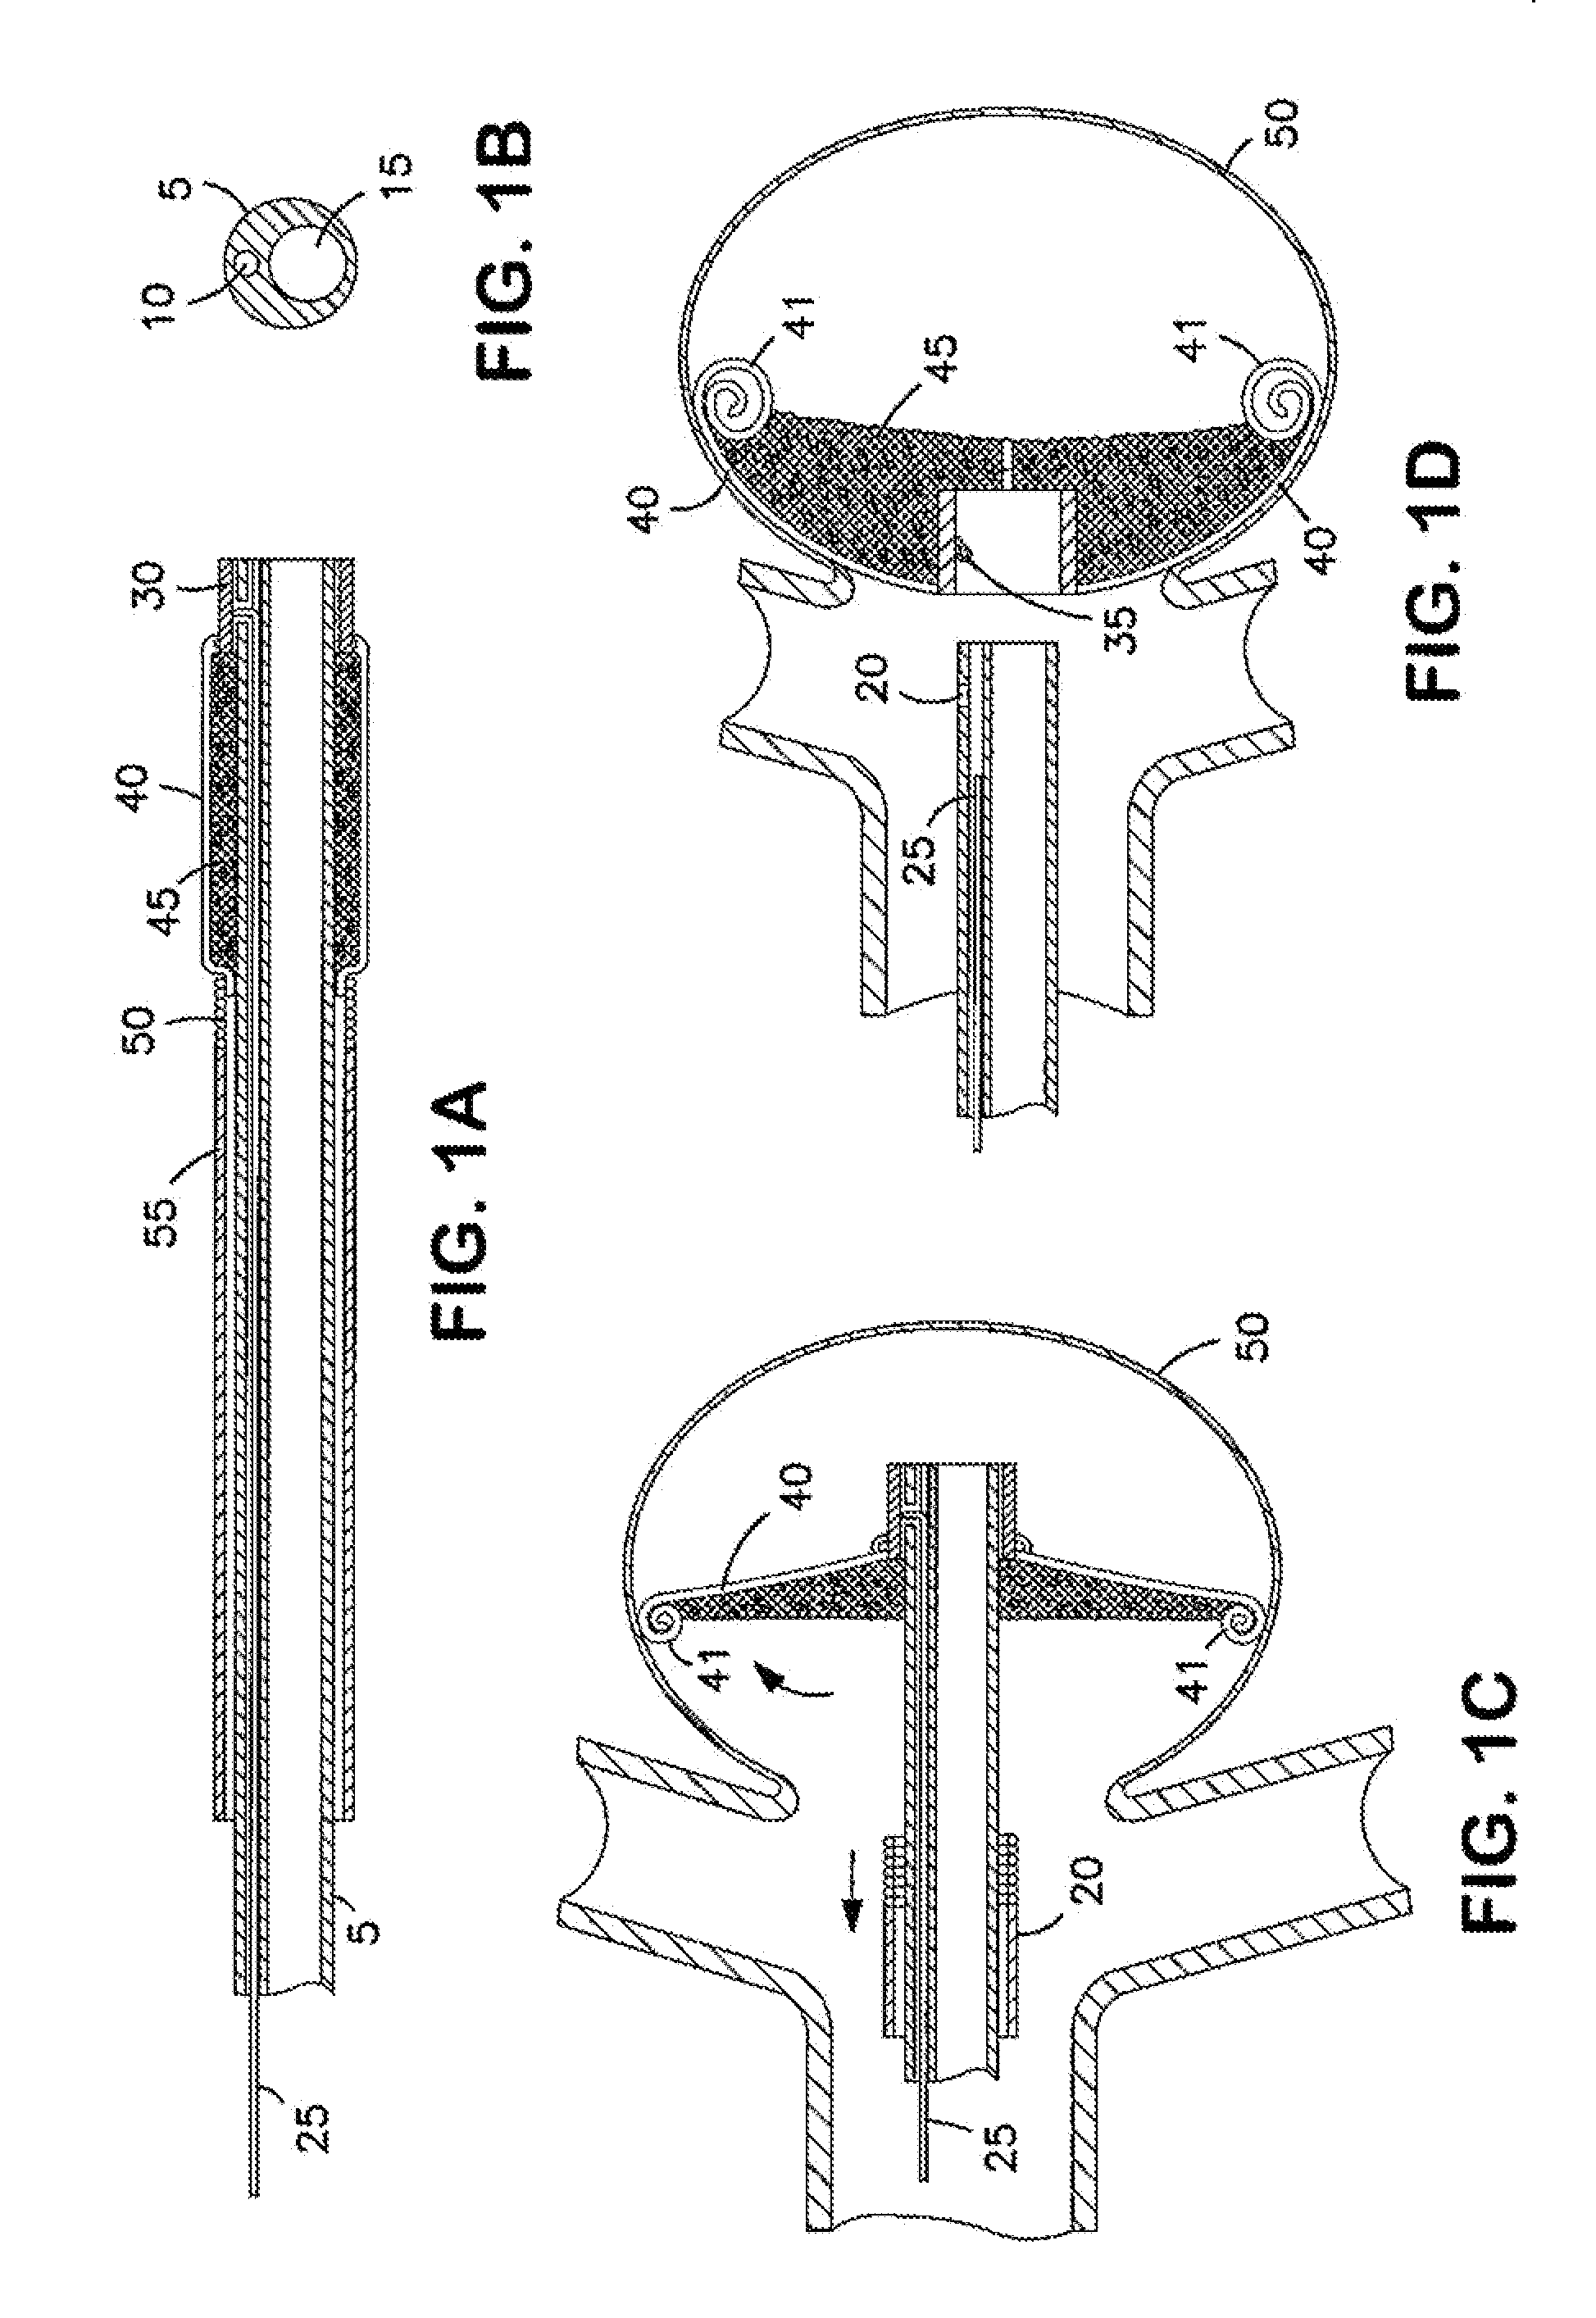 Aneurysm Occlusion Devices